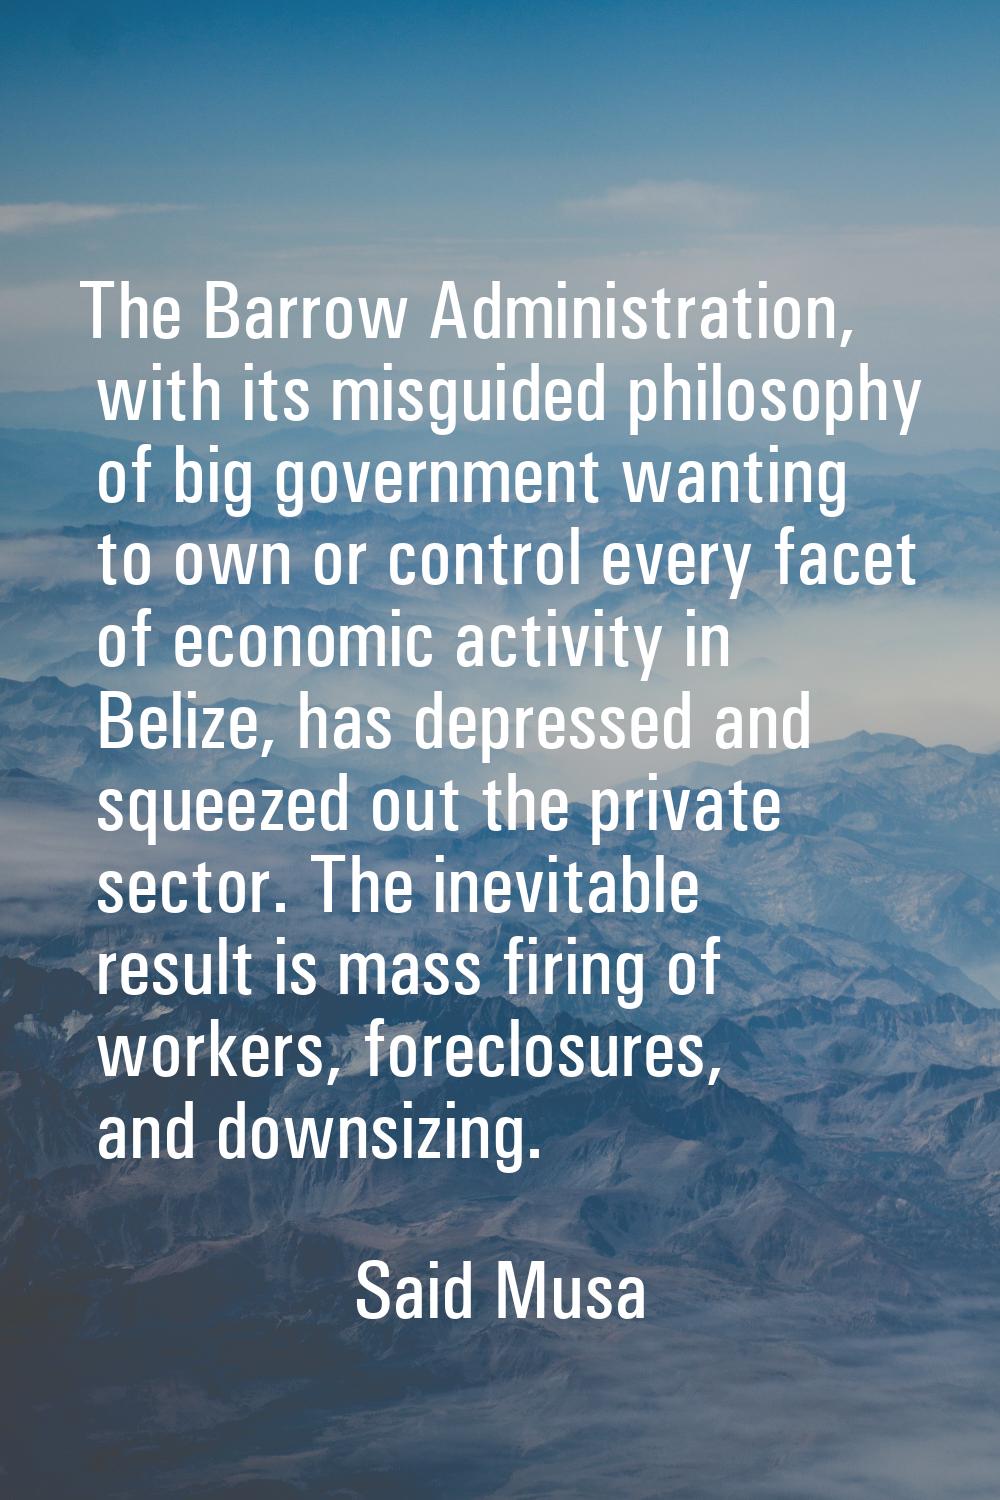 The Barrow Administration, with its misguided philosophy of big government wanting to own or contro